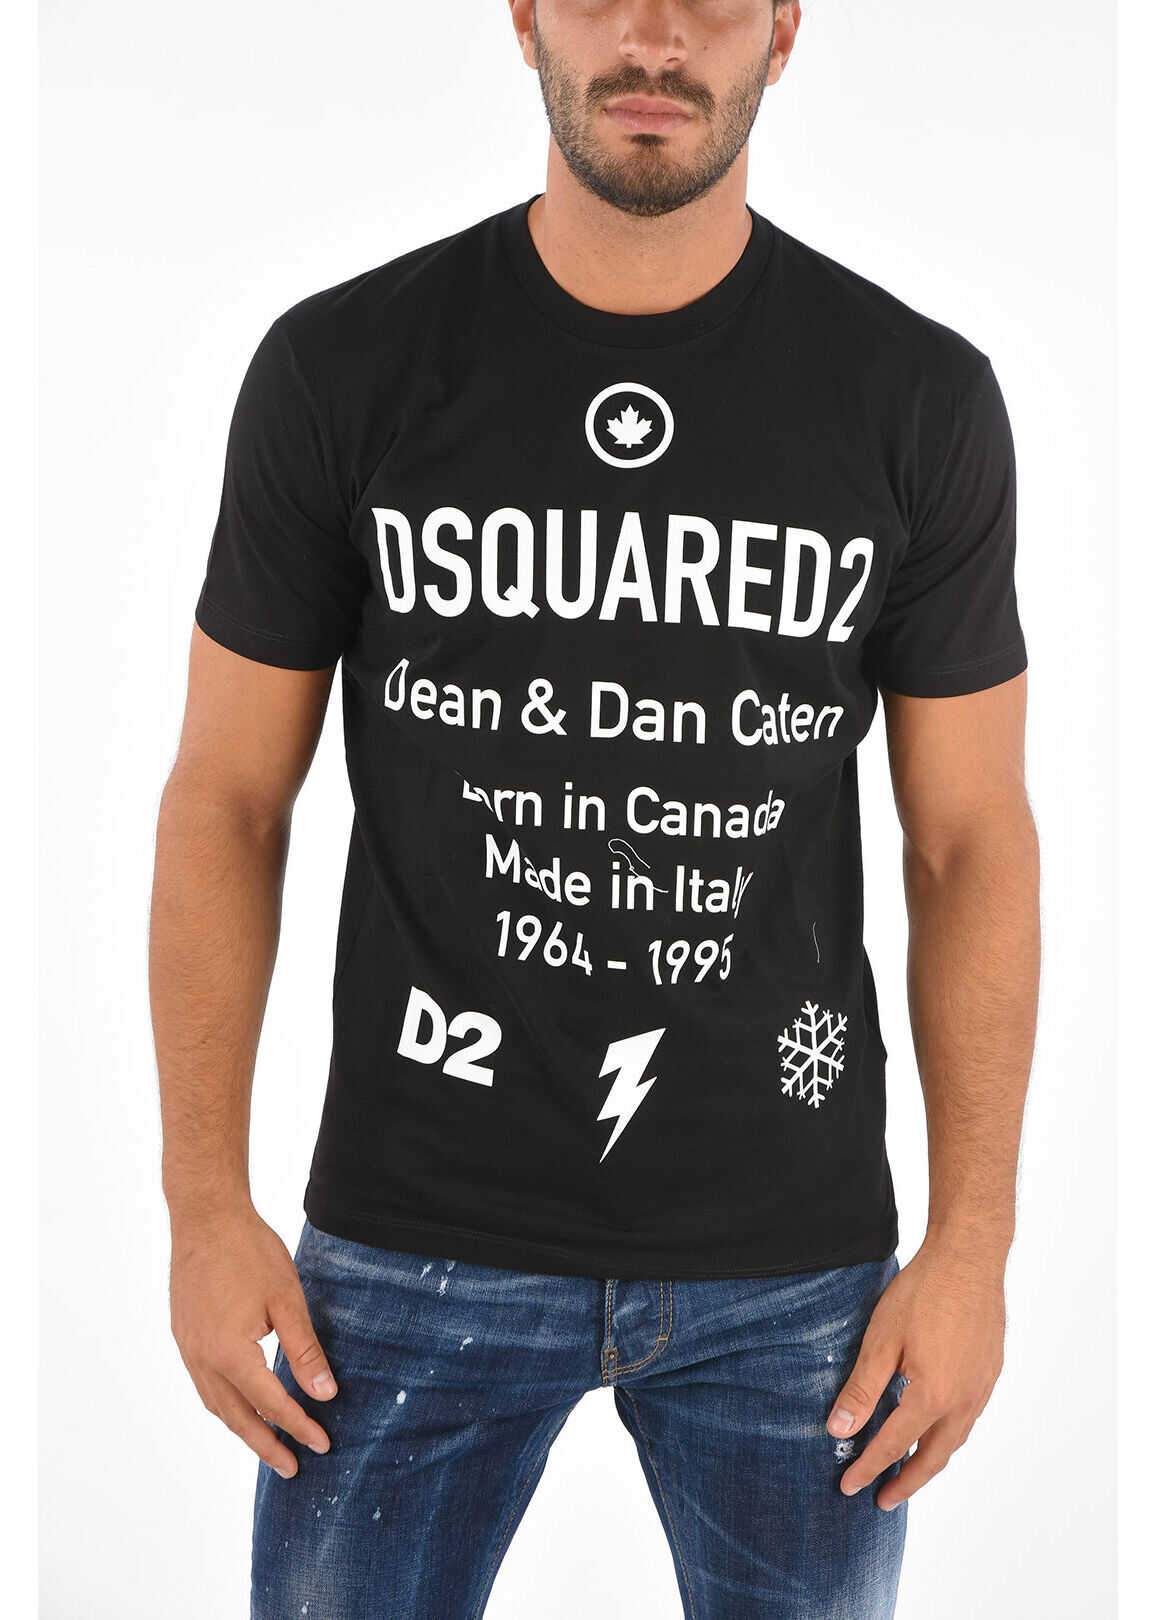 DSQUARED2 Printed Cool Fit T-Shirt Black & White